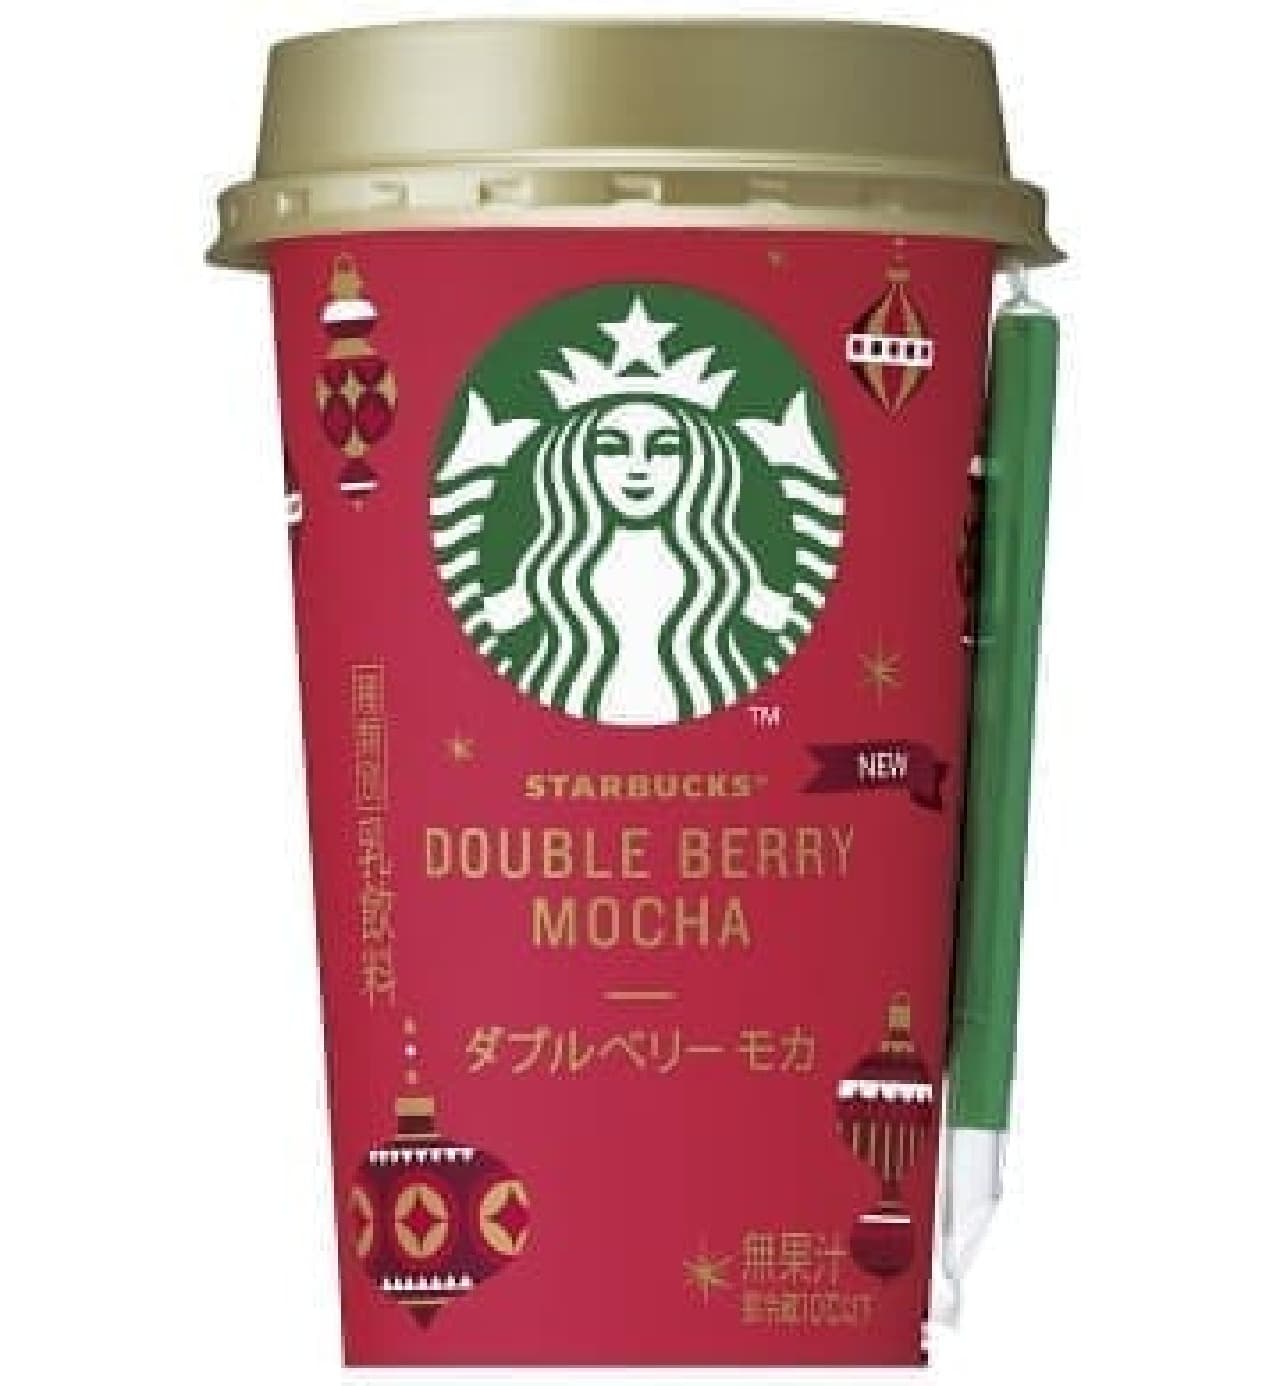 Chilled cup "Starbucks Double Berry Mocha"